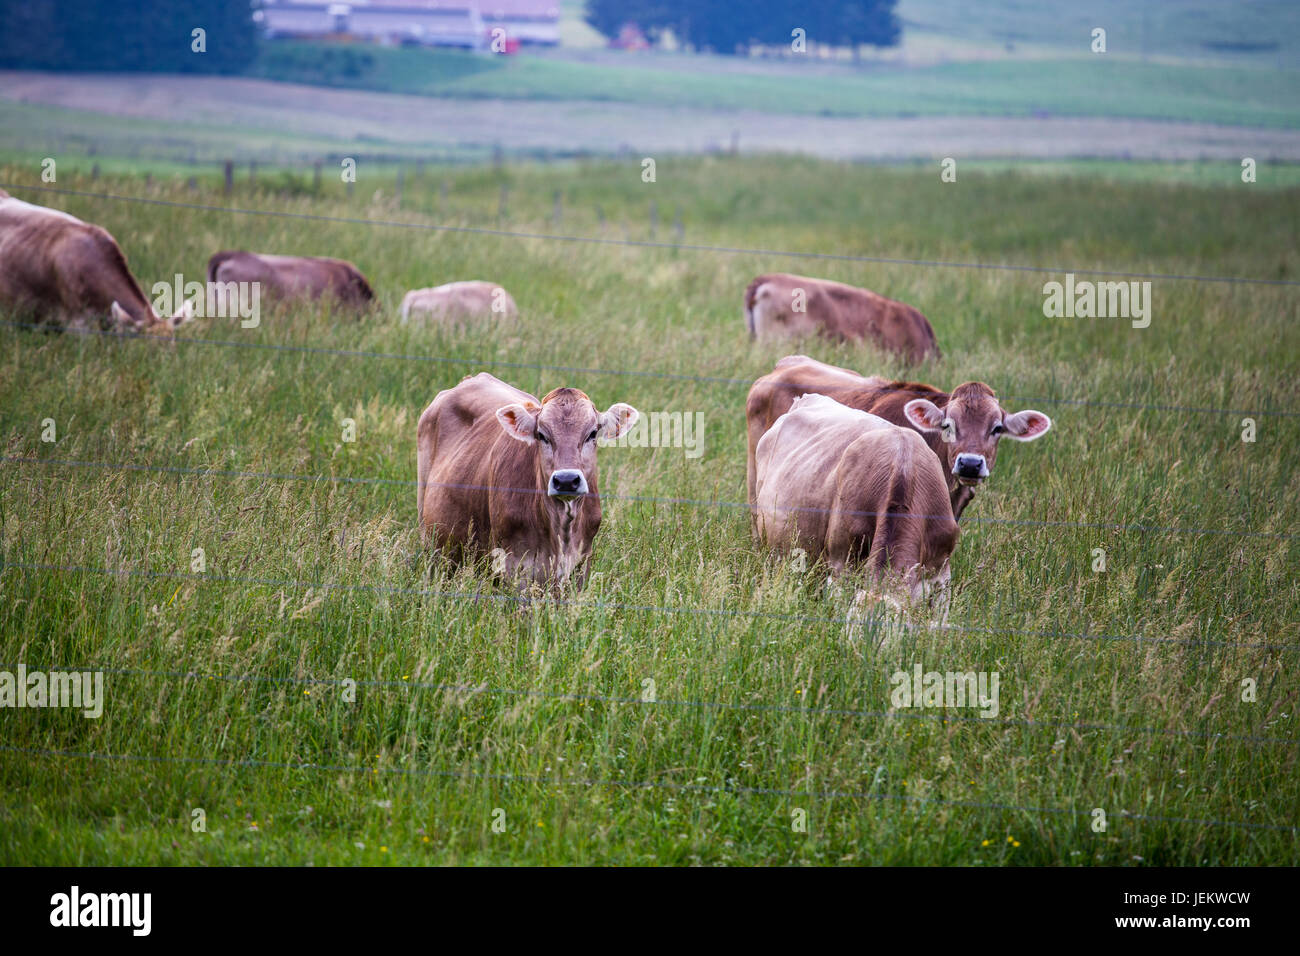 Cows (Swiss Braunvieh breed) standing on a green meadow with other cows grazing in the background behind a wire fence. Stock Photo